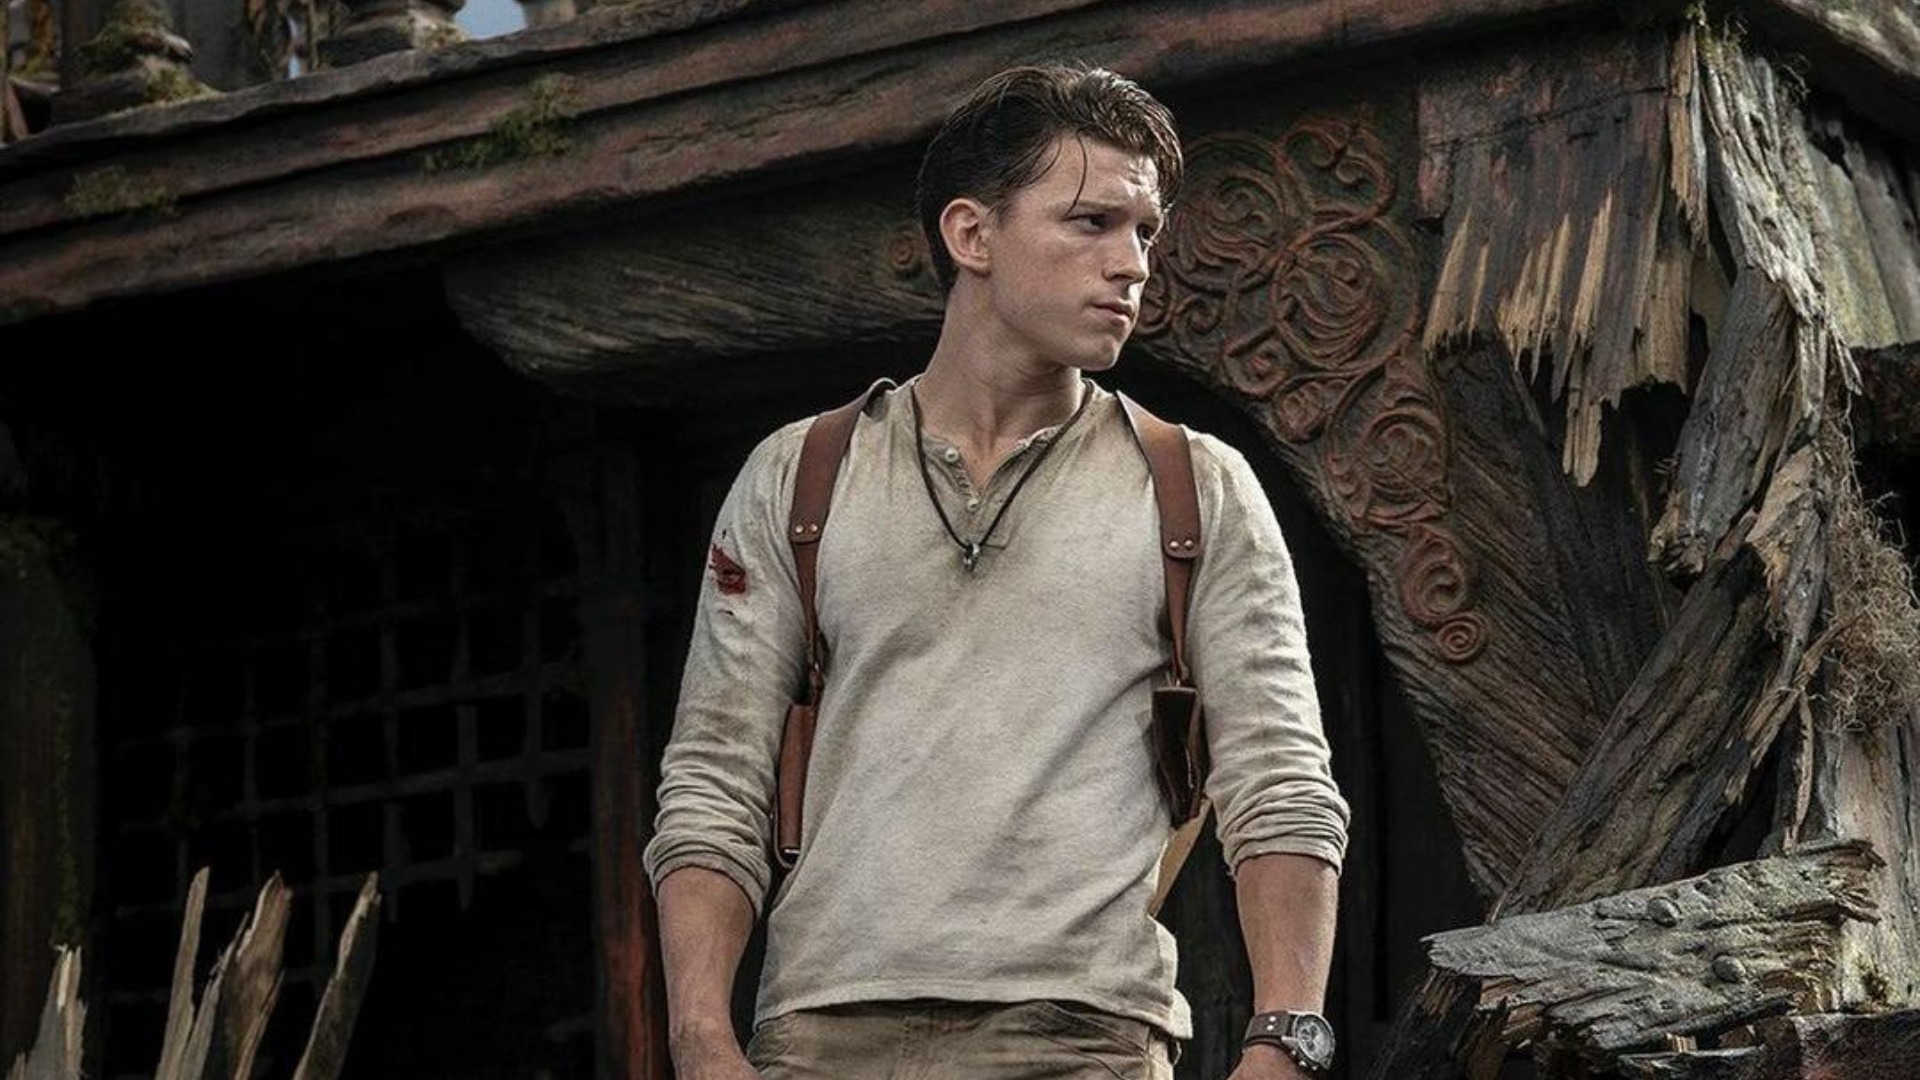 Uncharted Movie: Everything You Need to Know About Tom Holland’s Latest Film